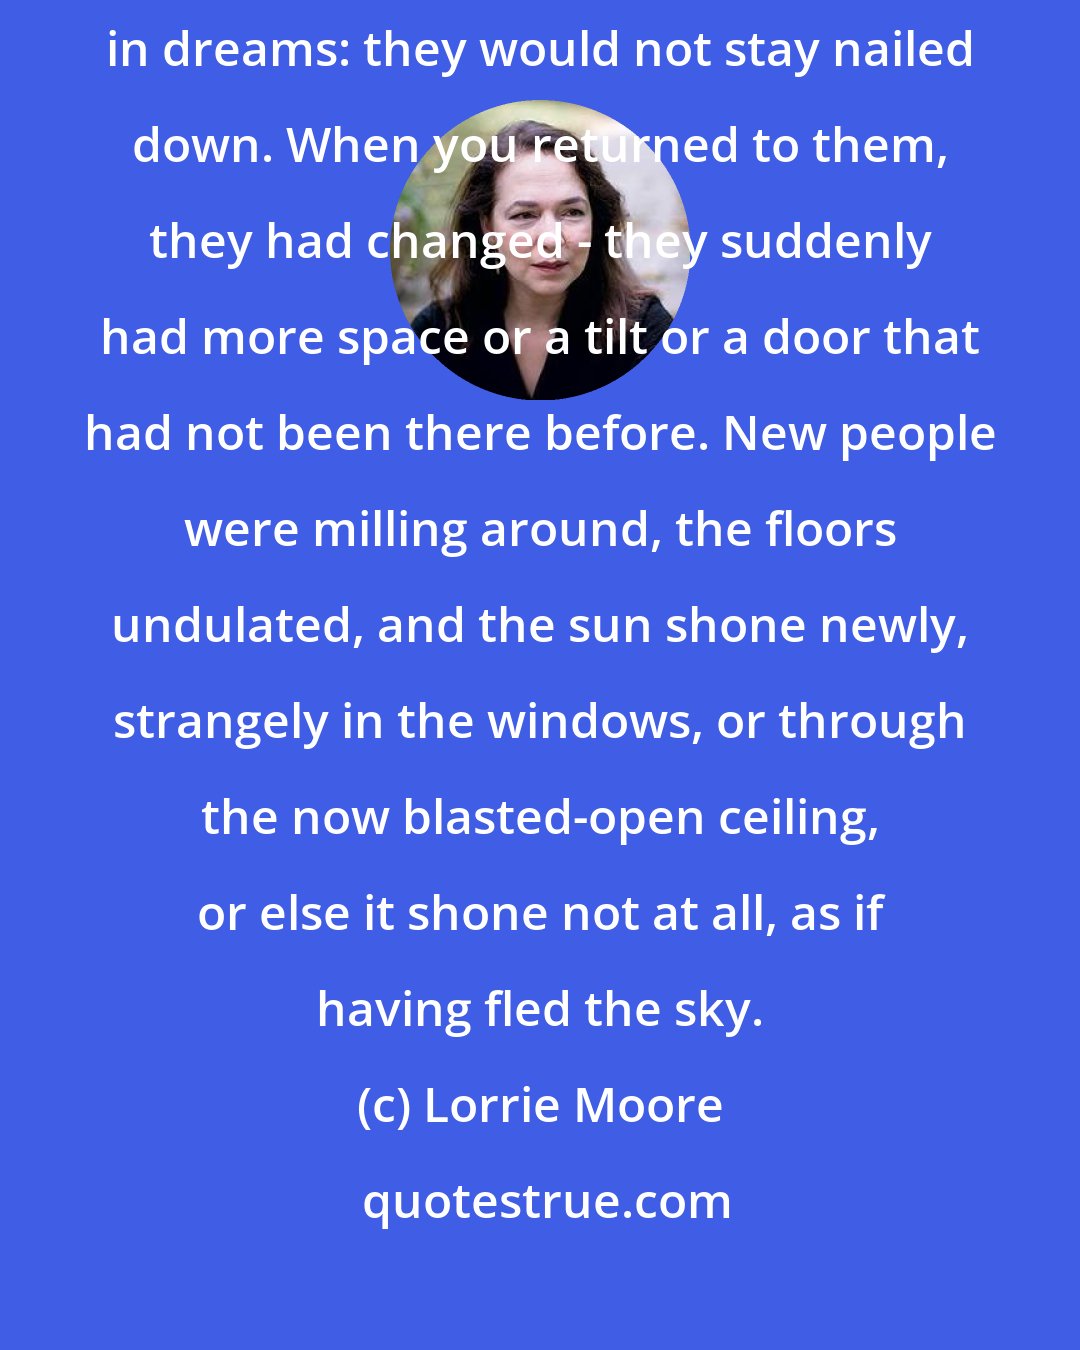 Lorrie Moore: Blasts from the past were like the rooms one entered and re-entered in dreams: they would not stay nailed down. When you returned to them, they had changed - they suddenly had more space or a tilt or a door that had not been there before. New people were milling around, the floors undulated, and the sun shone newly, strangely in the windows, or through the now blasted-open ceiling, or else it shone not at all, as if having fled the sky.